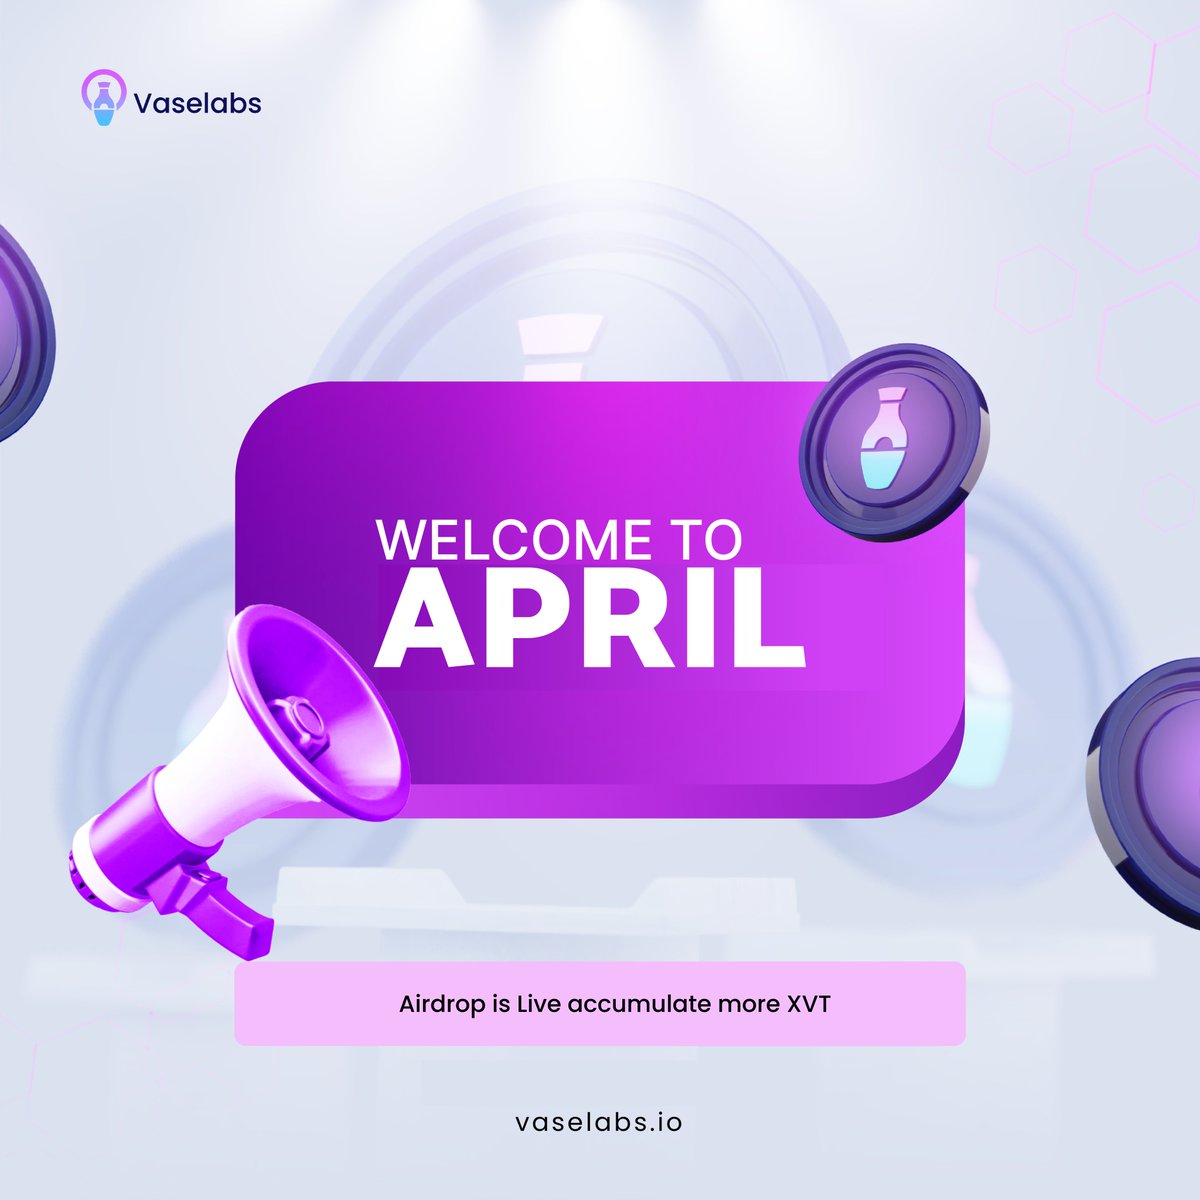 🧘‍♂️🍃 Embrace this new month with a peaceful mind and a rejuvenated spirit as we ride the bull market. Join Airdrop: vaselabs.io/airdrop-v2 #vse #vaselabs #vasetoken #newmonth #April